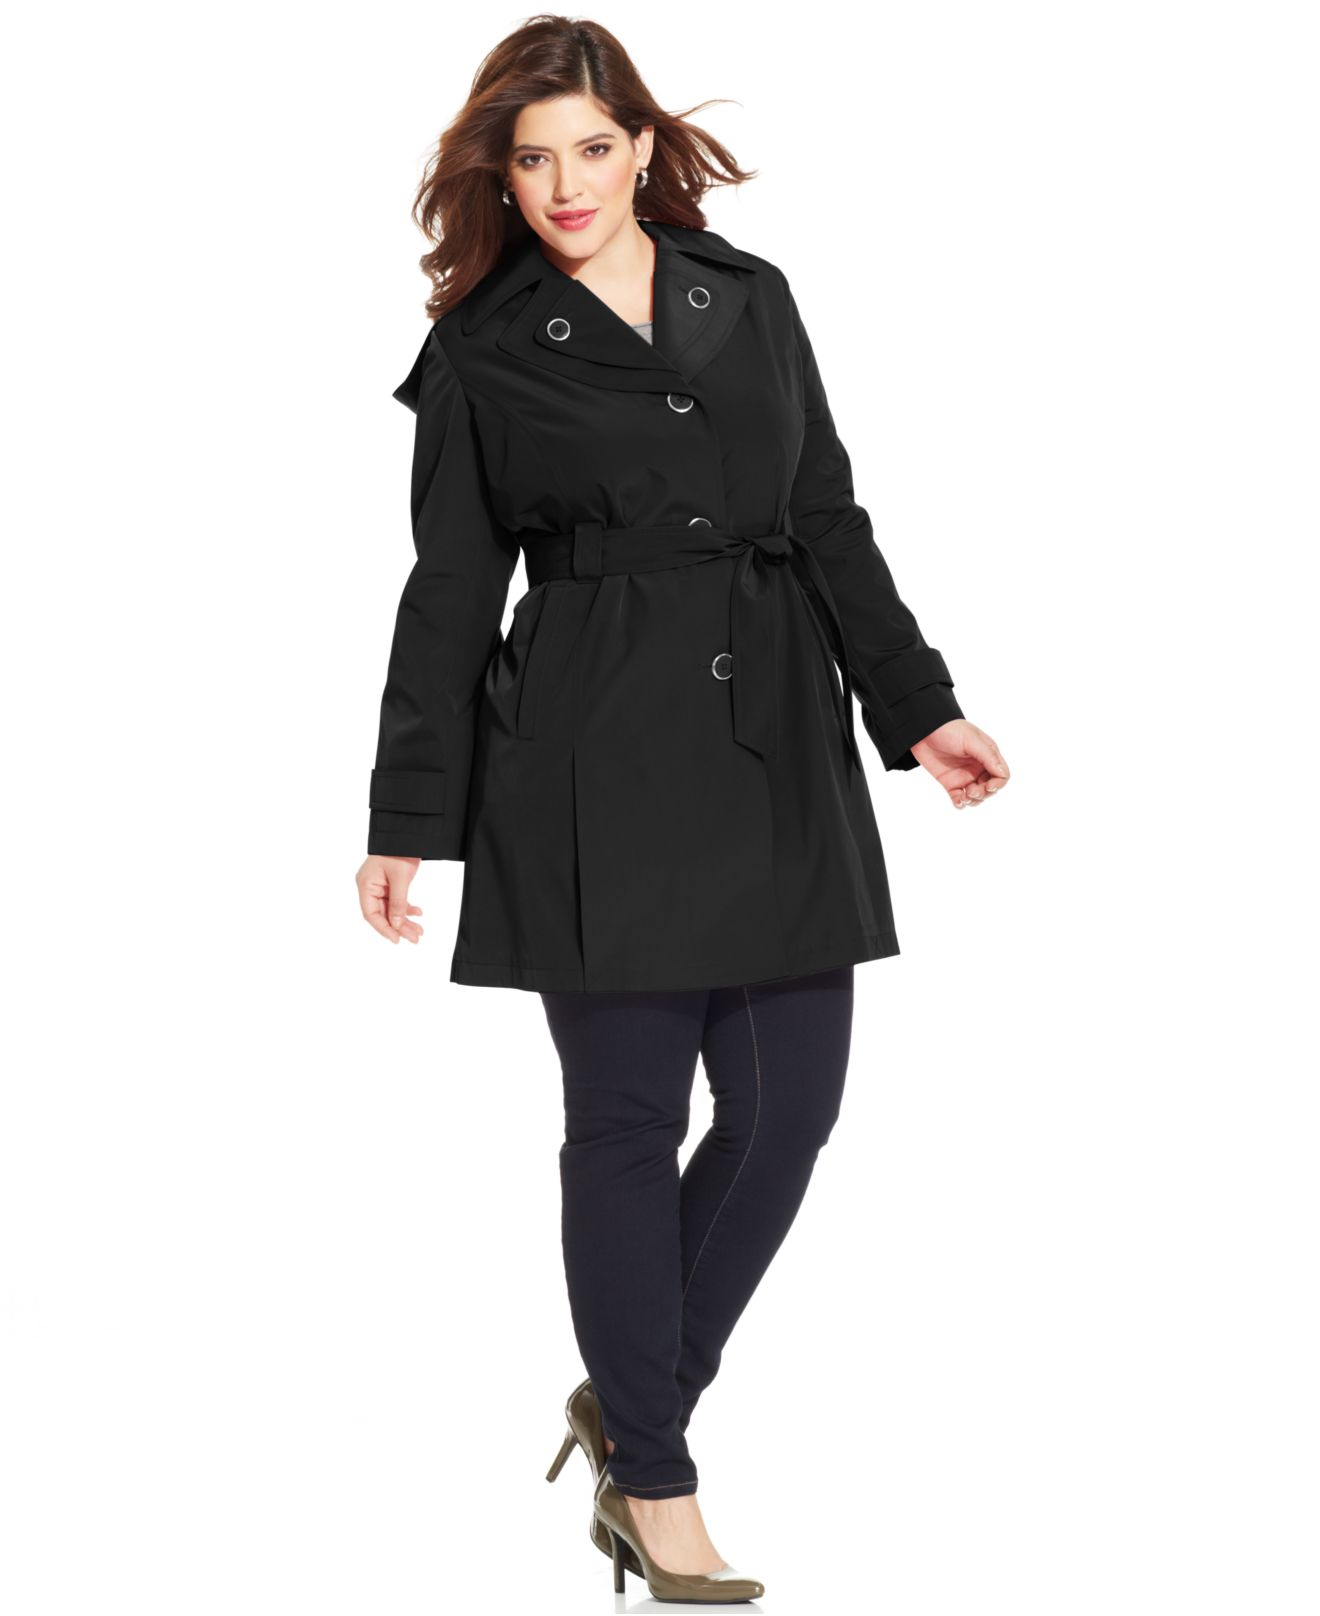 Lyst - London Fog Plus Size Hooded Layered-Lapel Trench Coat in Black